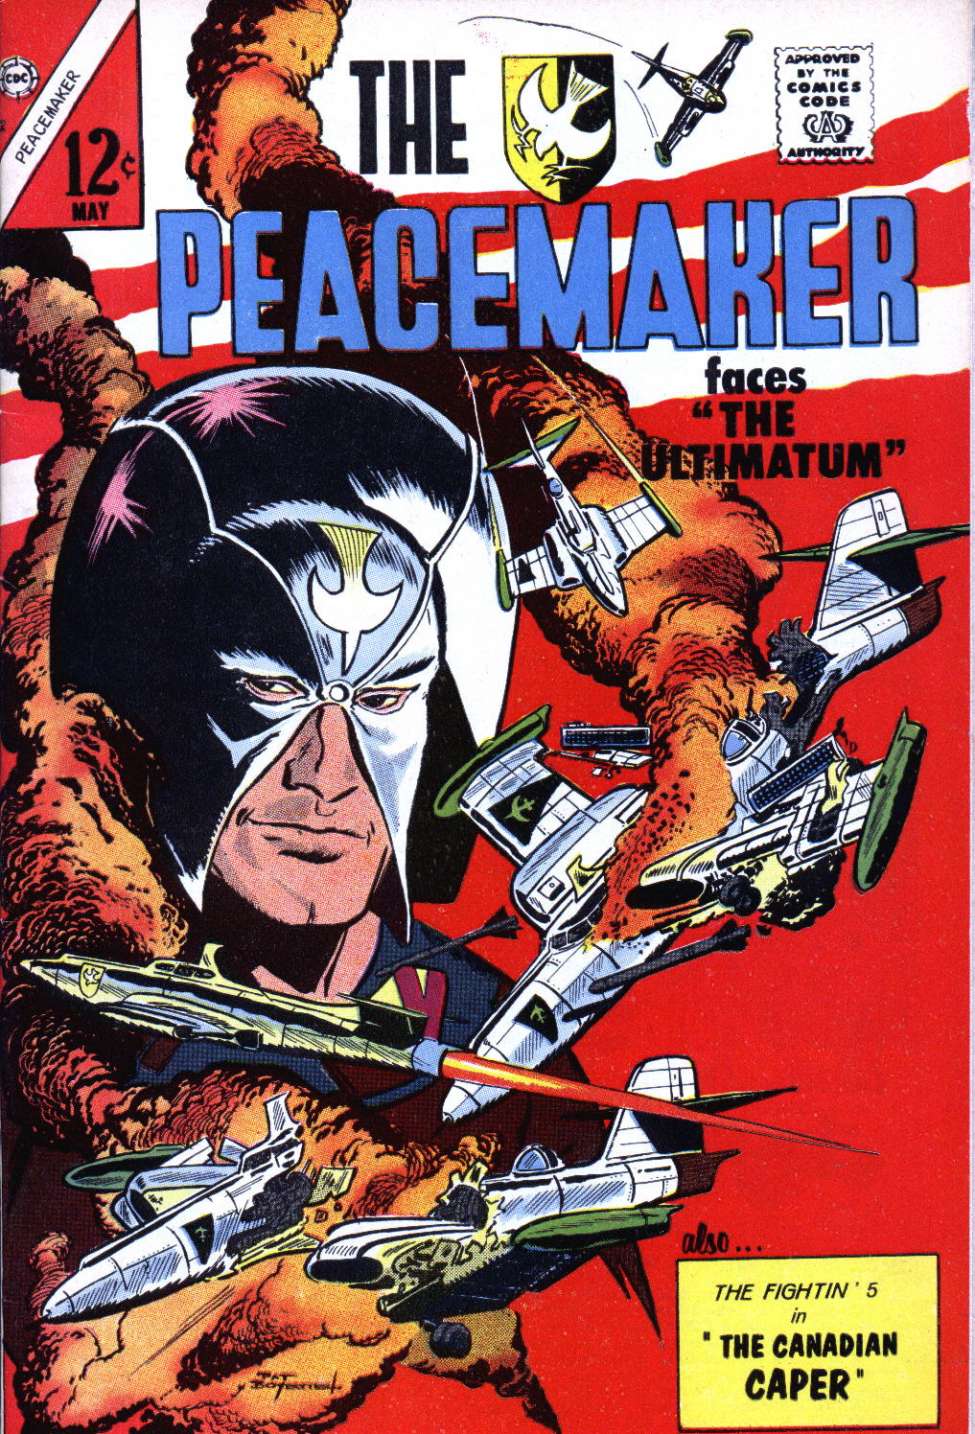 Book Cover For Peacemaker 2 - Version 1